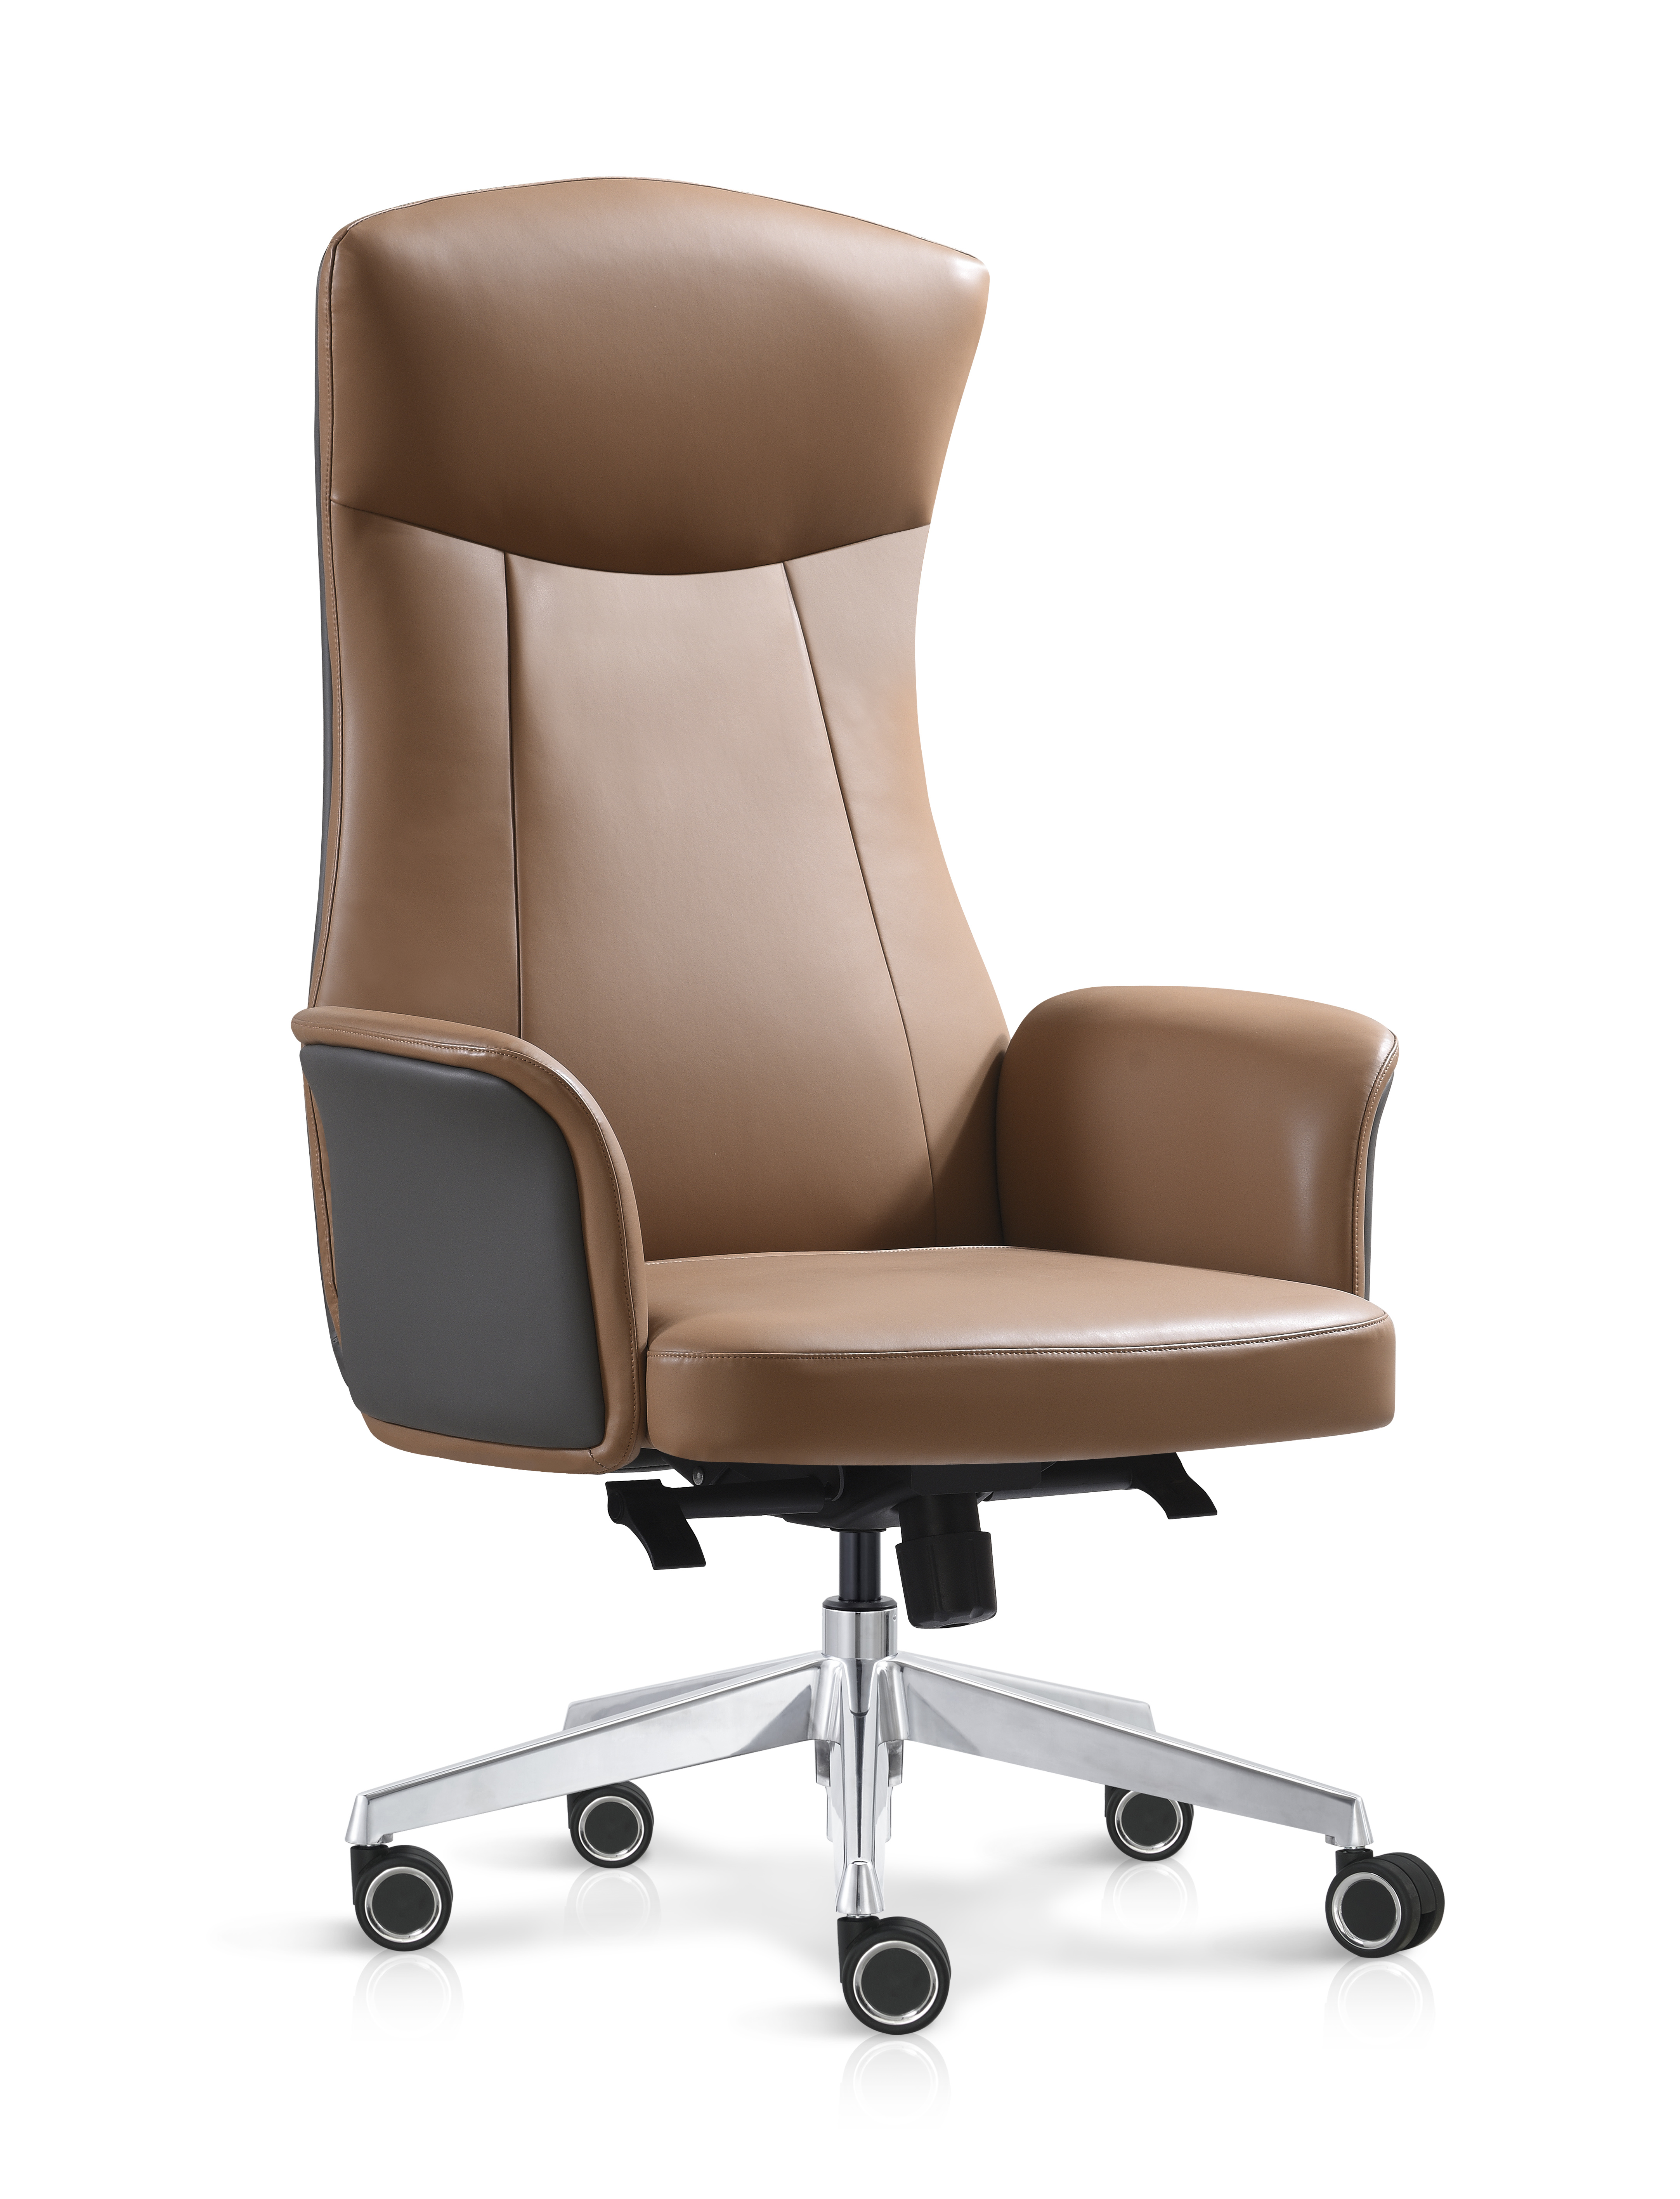 High Quality Office Chair High Back Leather